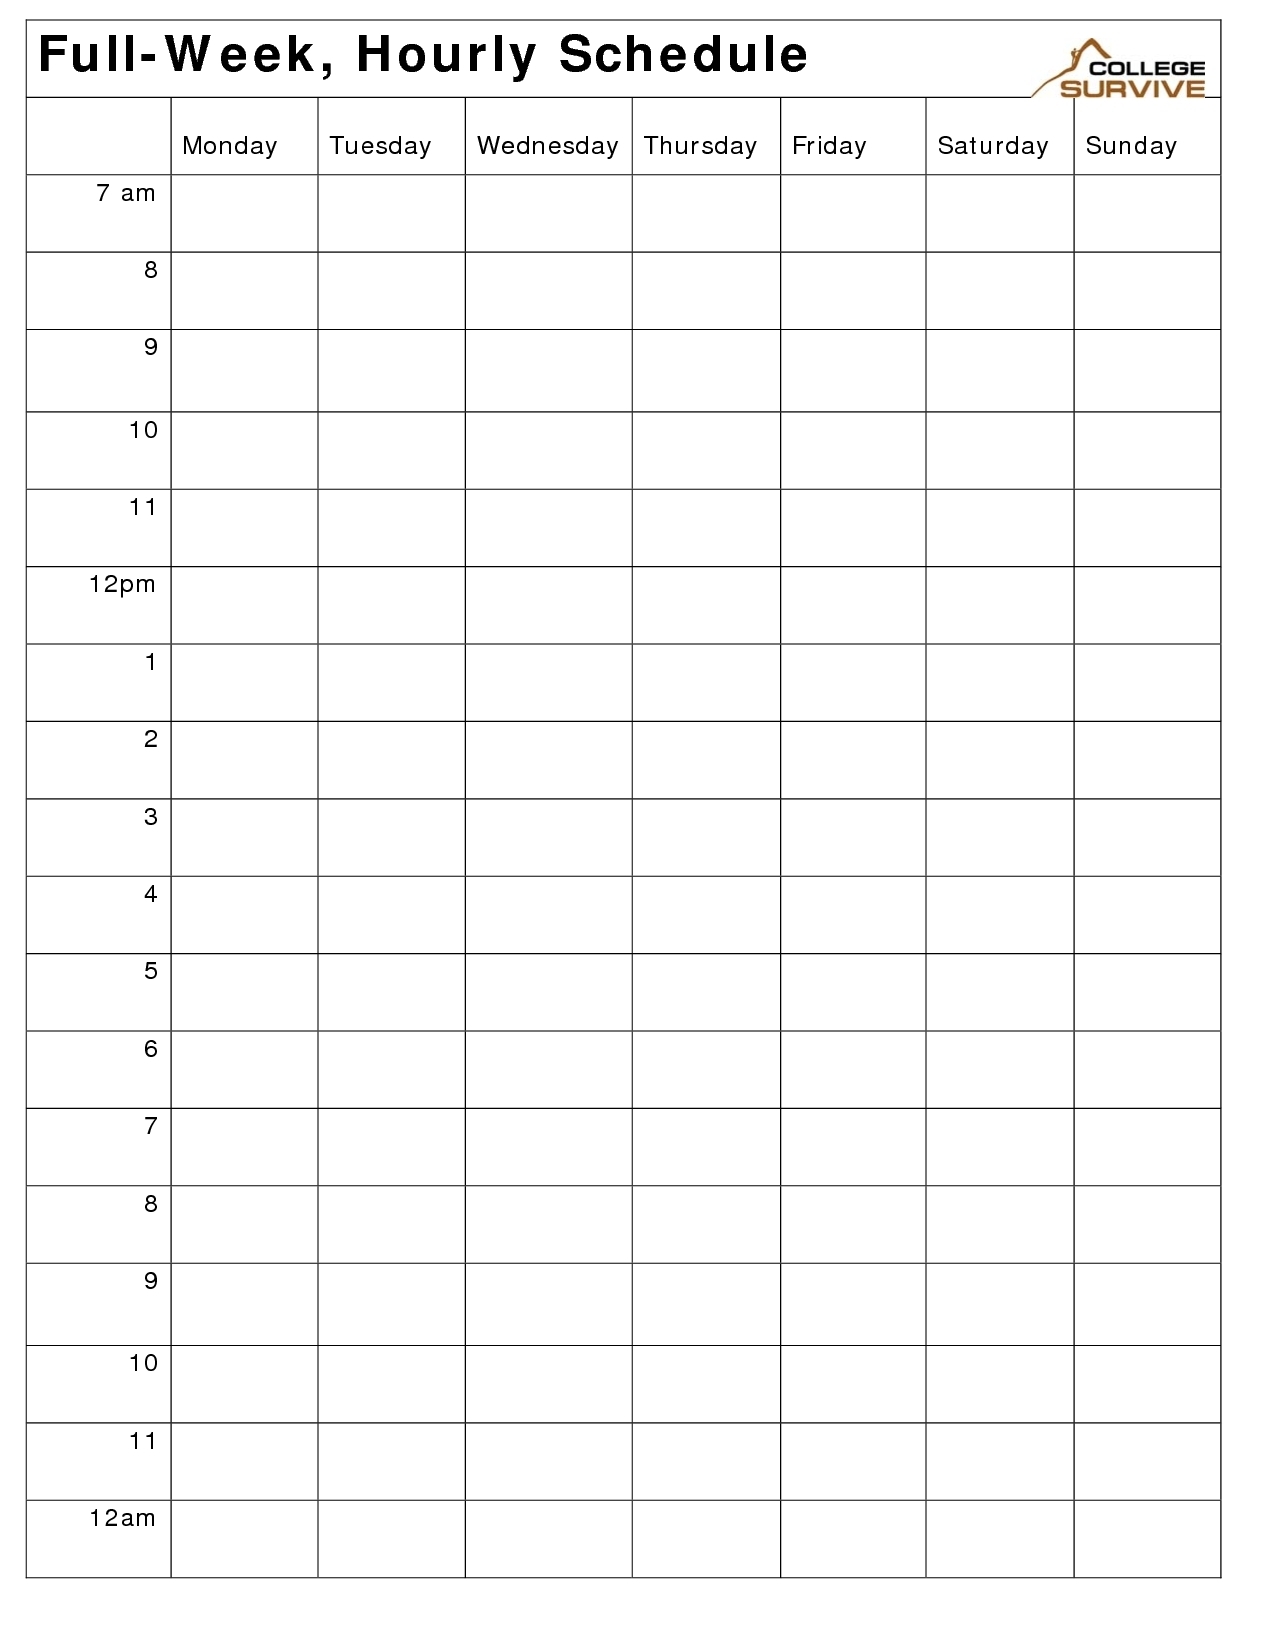 Blank Calendar 5 Day Week With Times | Template Calendar Printable in Blank Calendar 5 Day Week With Times